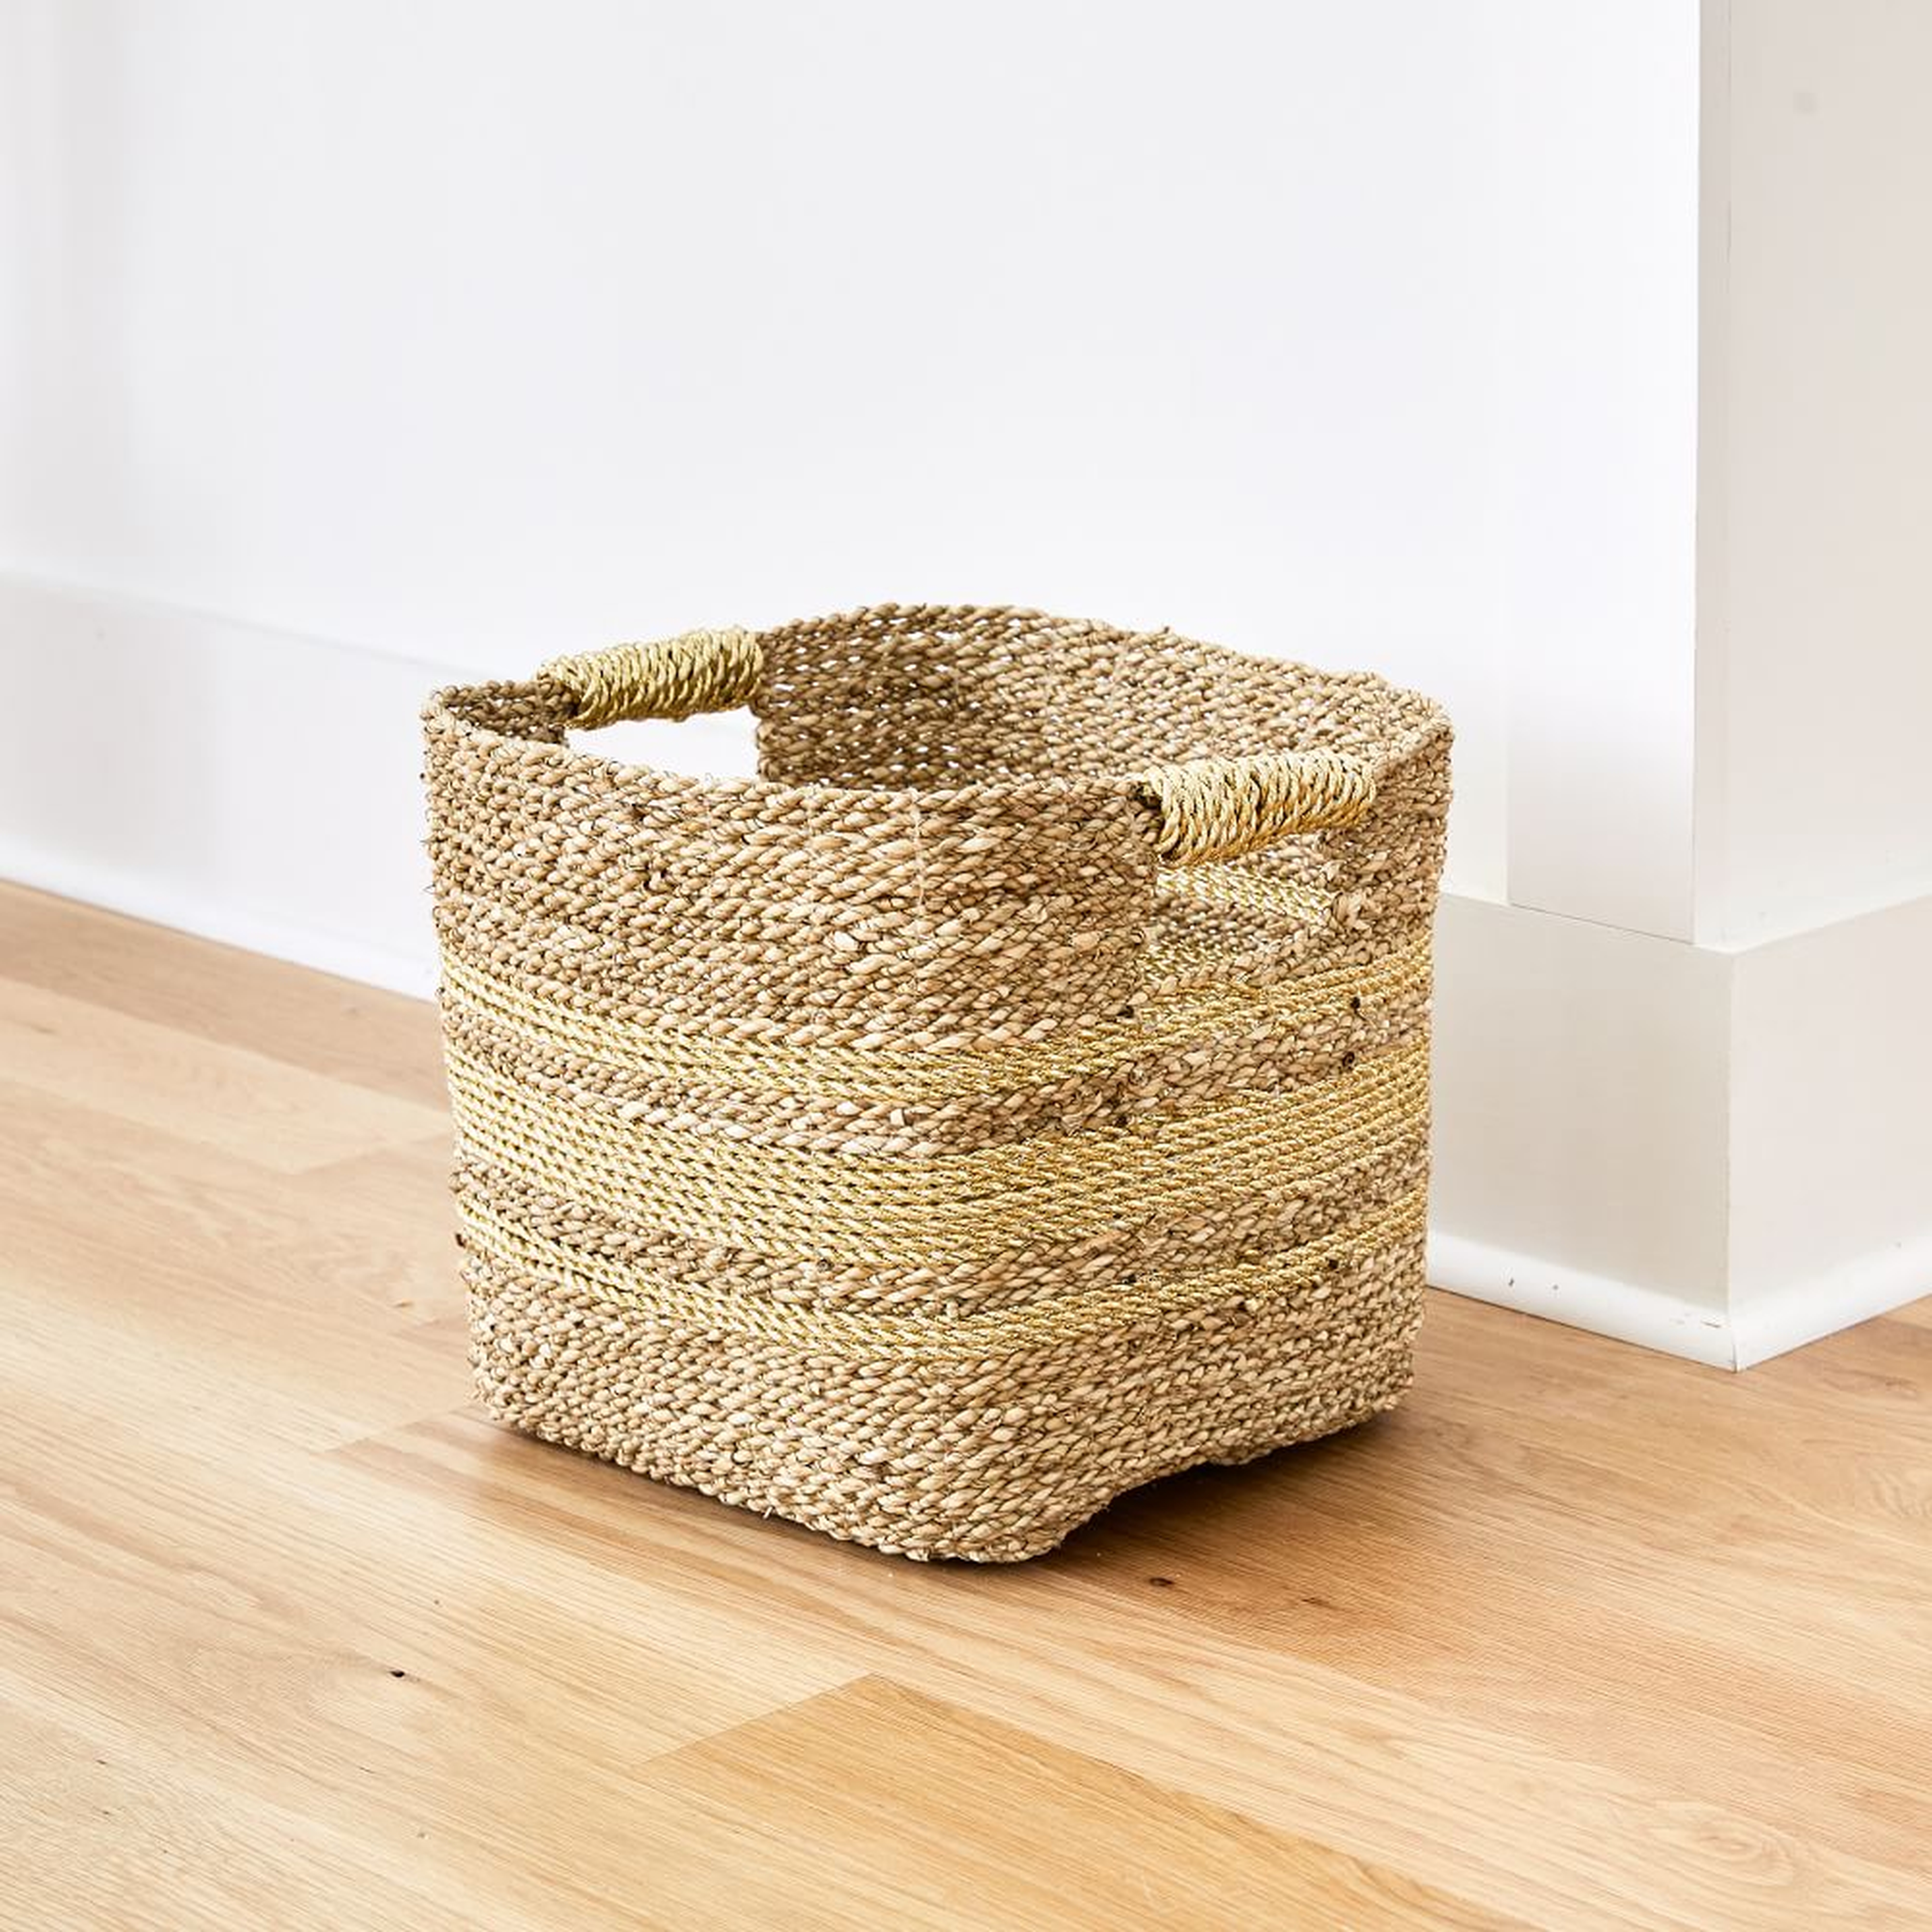 Two Tone Metallic Woven, Large Utility, Natural/Gold, 12.5"W x 12"H - West Elm